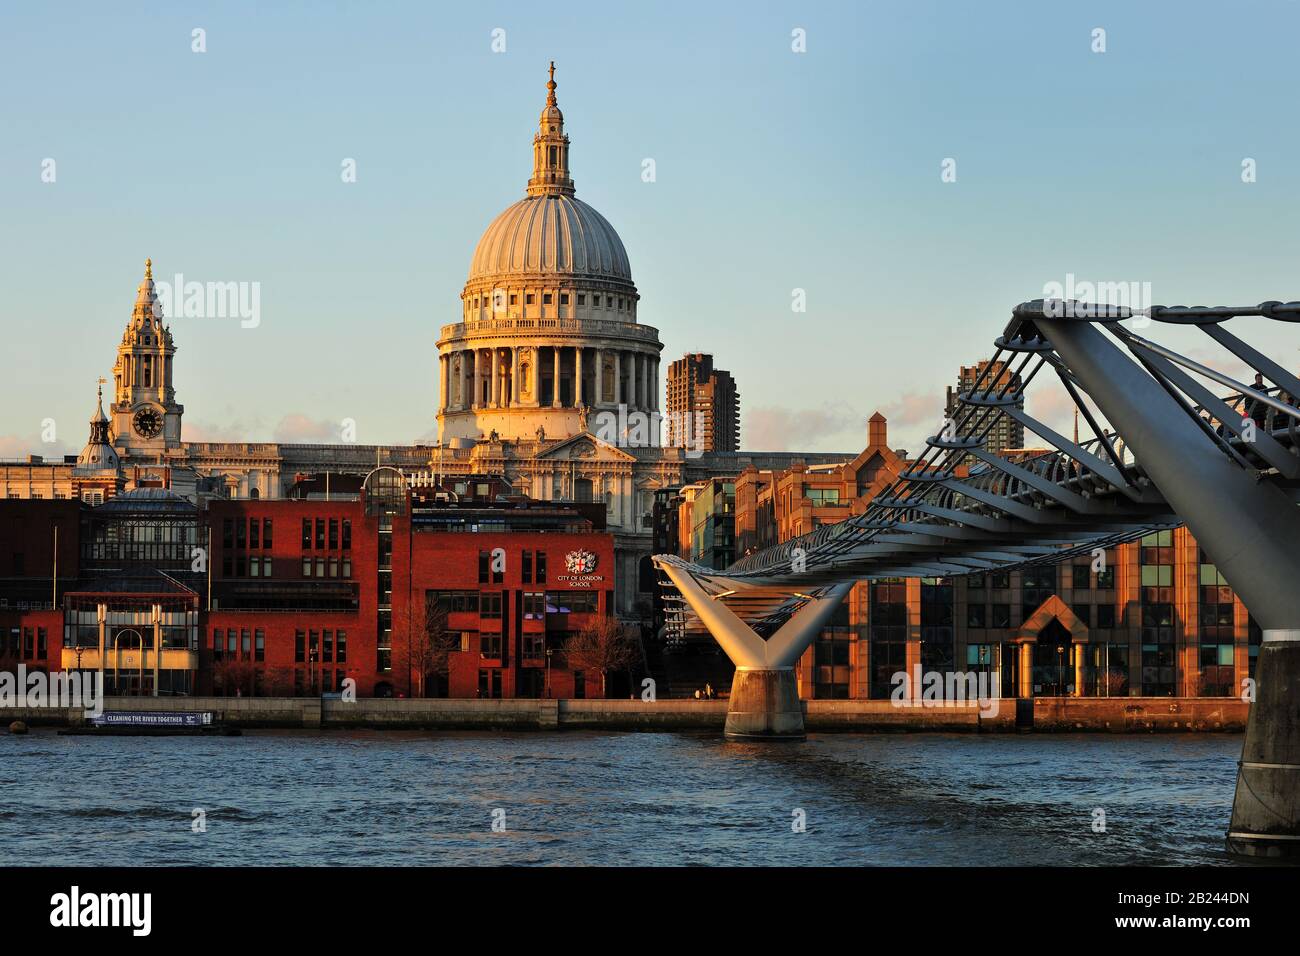 A landscape image of St Paul's Cathedral and the Millennium Bridge London seen from the opposite bank of the River Thames at Sunset. Stock Photo